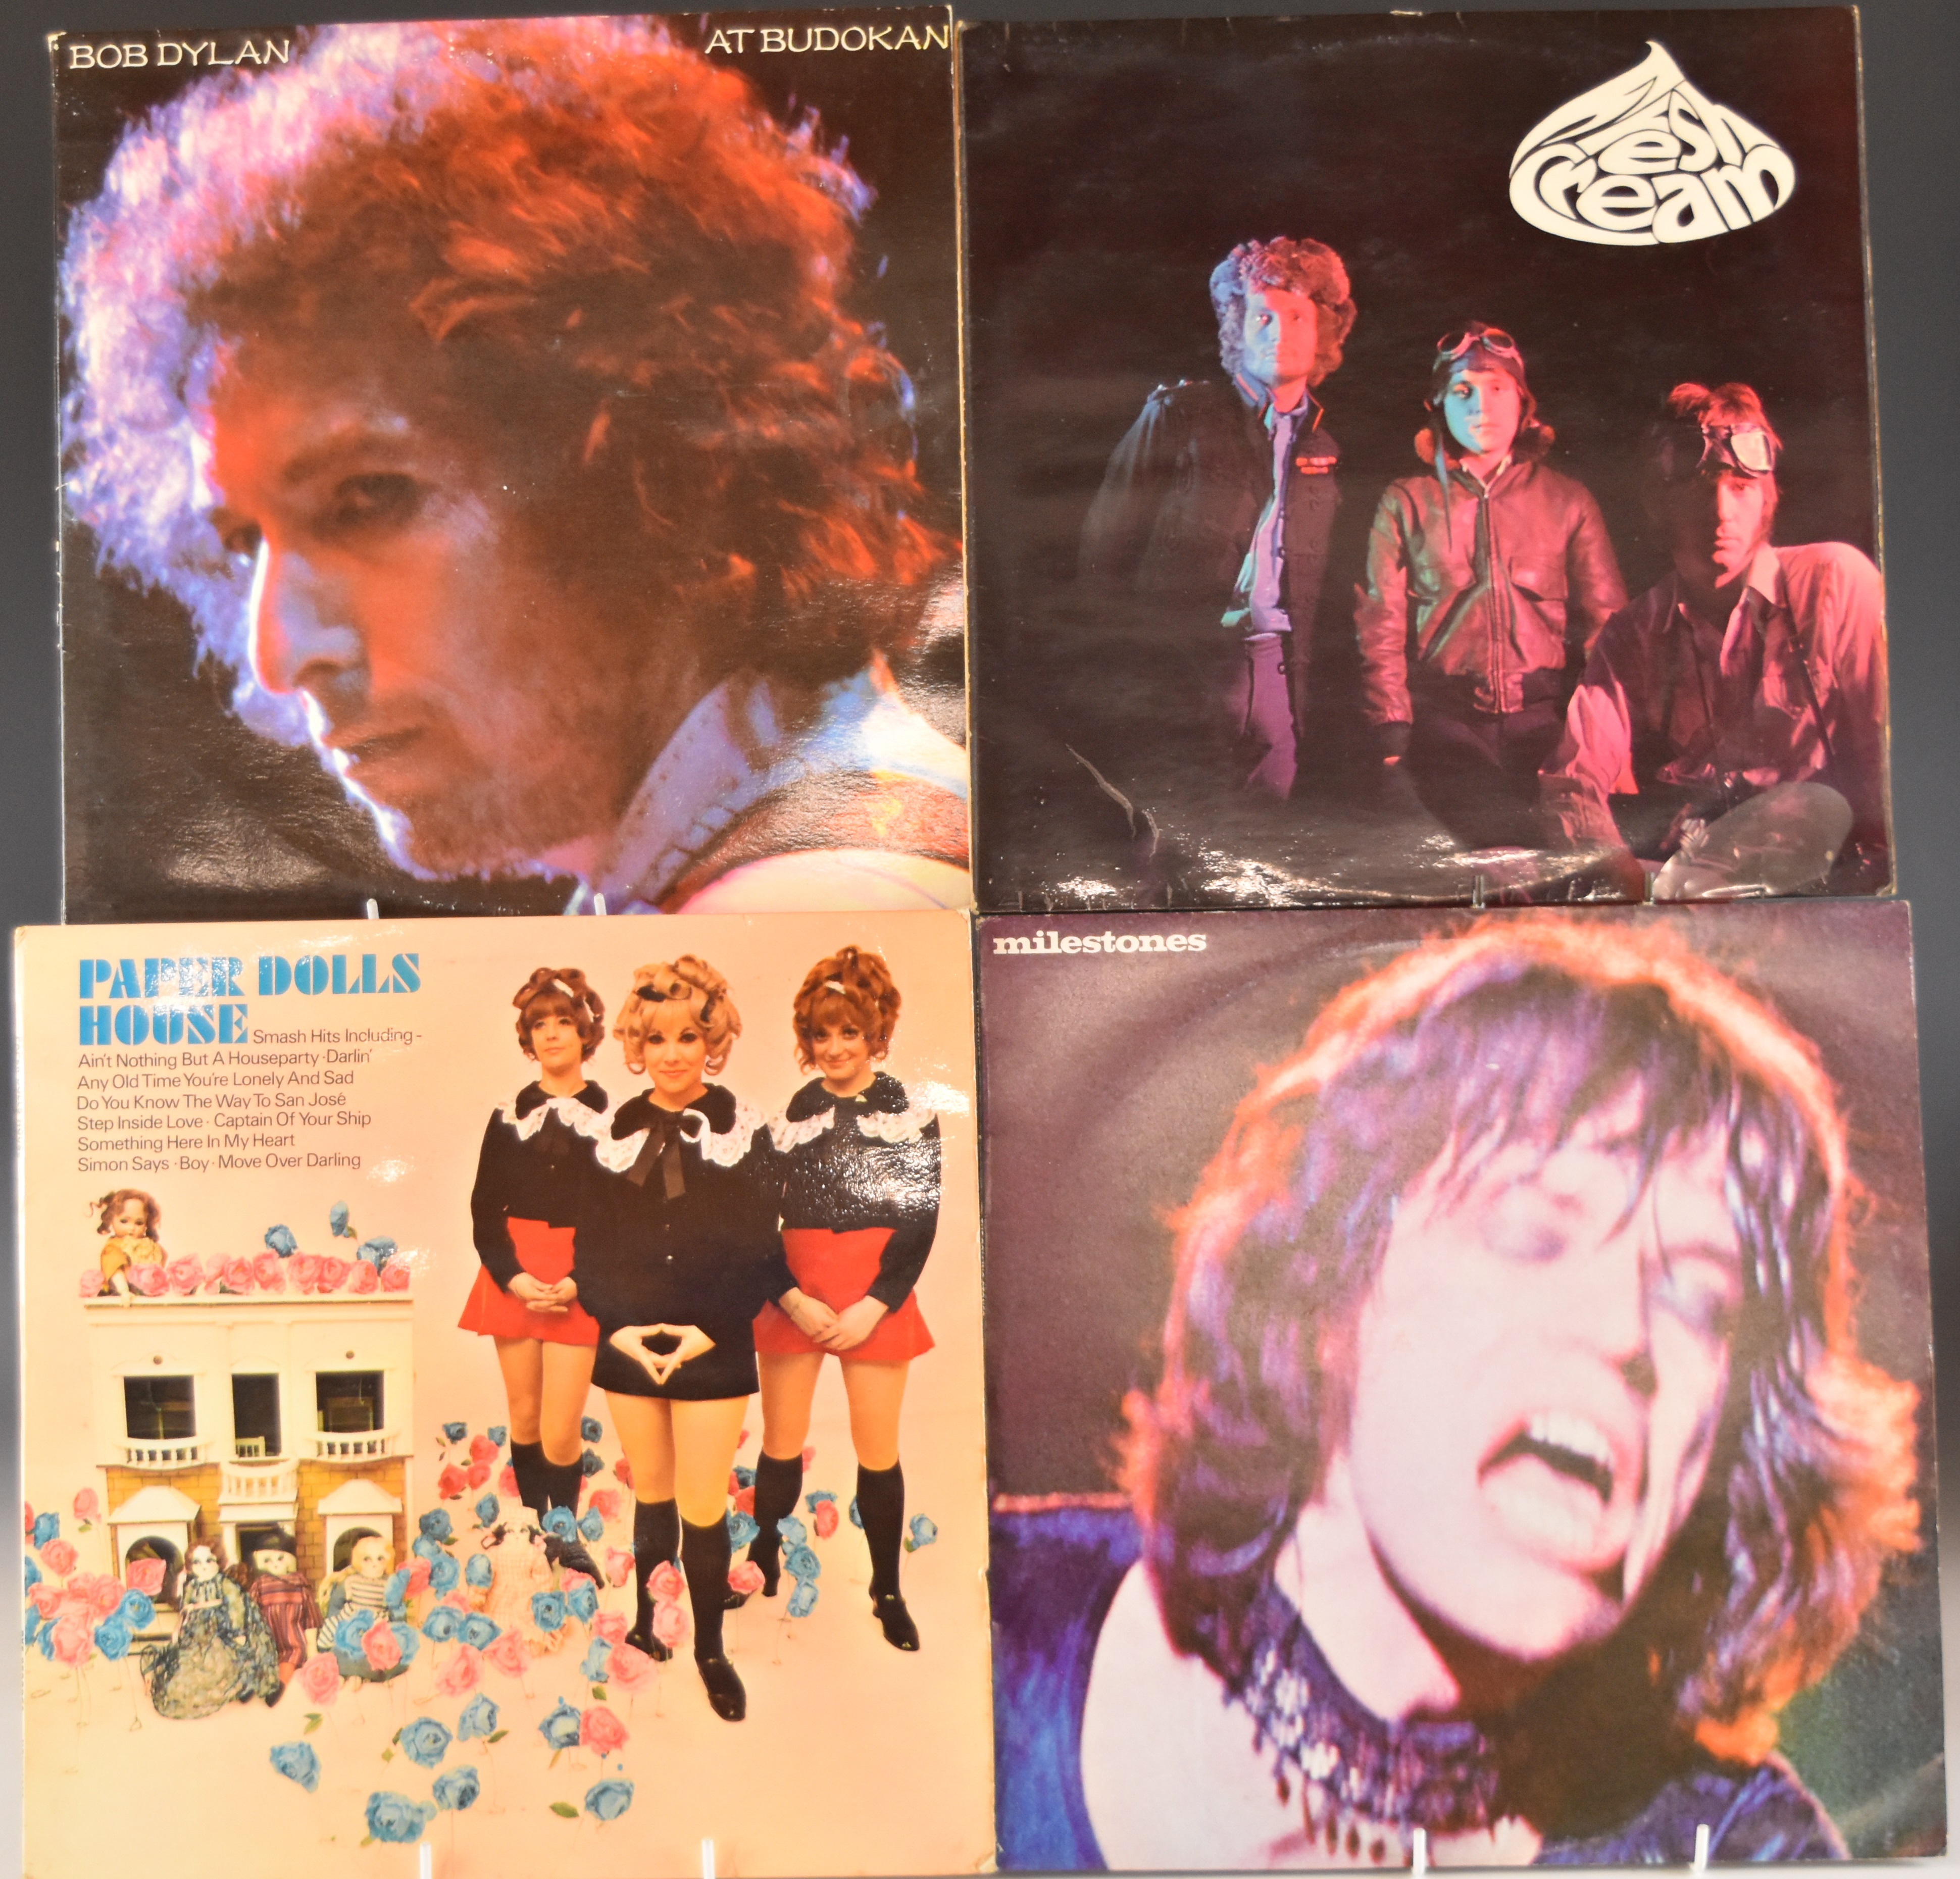 Approximately 55 Rock, Pop and Beat LPs including Paper Dolls House, Cream Fresh Cream, Rolling